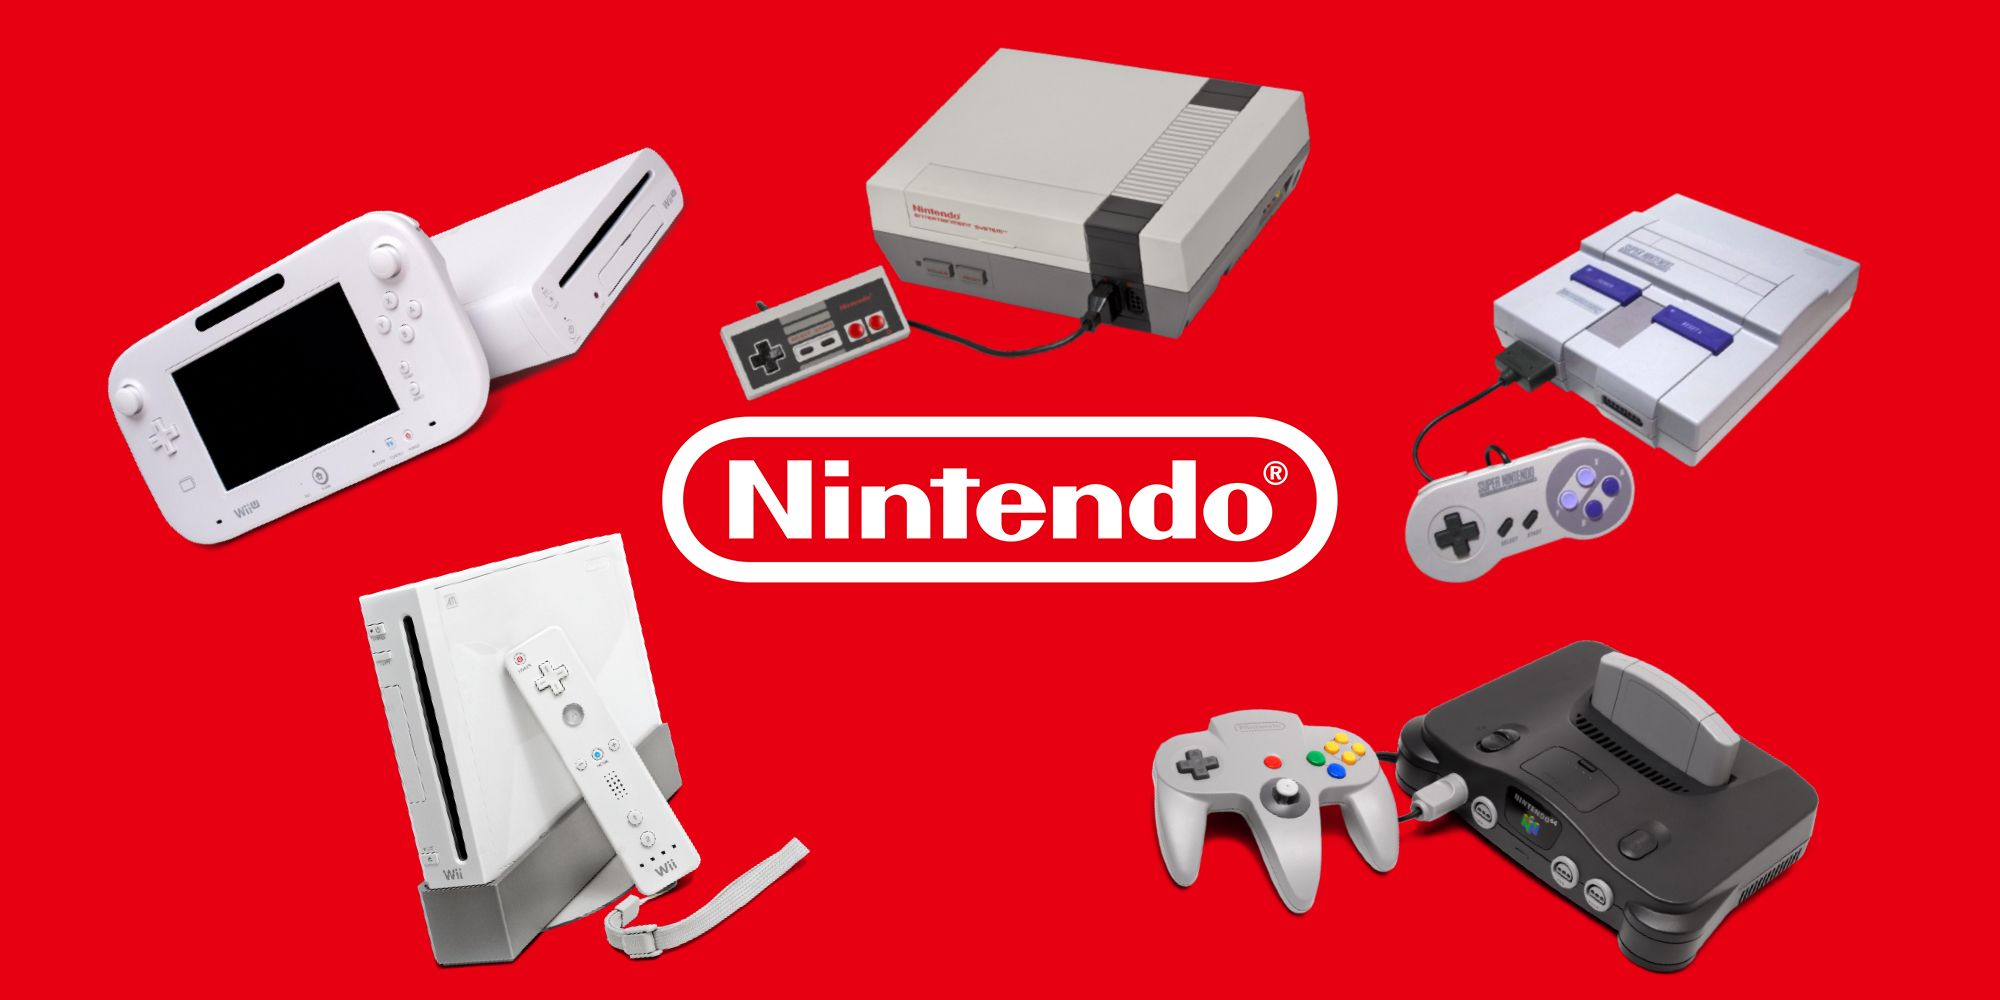 Nintendo's consoles received increasingly abstract names